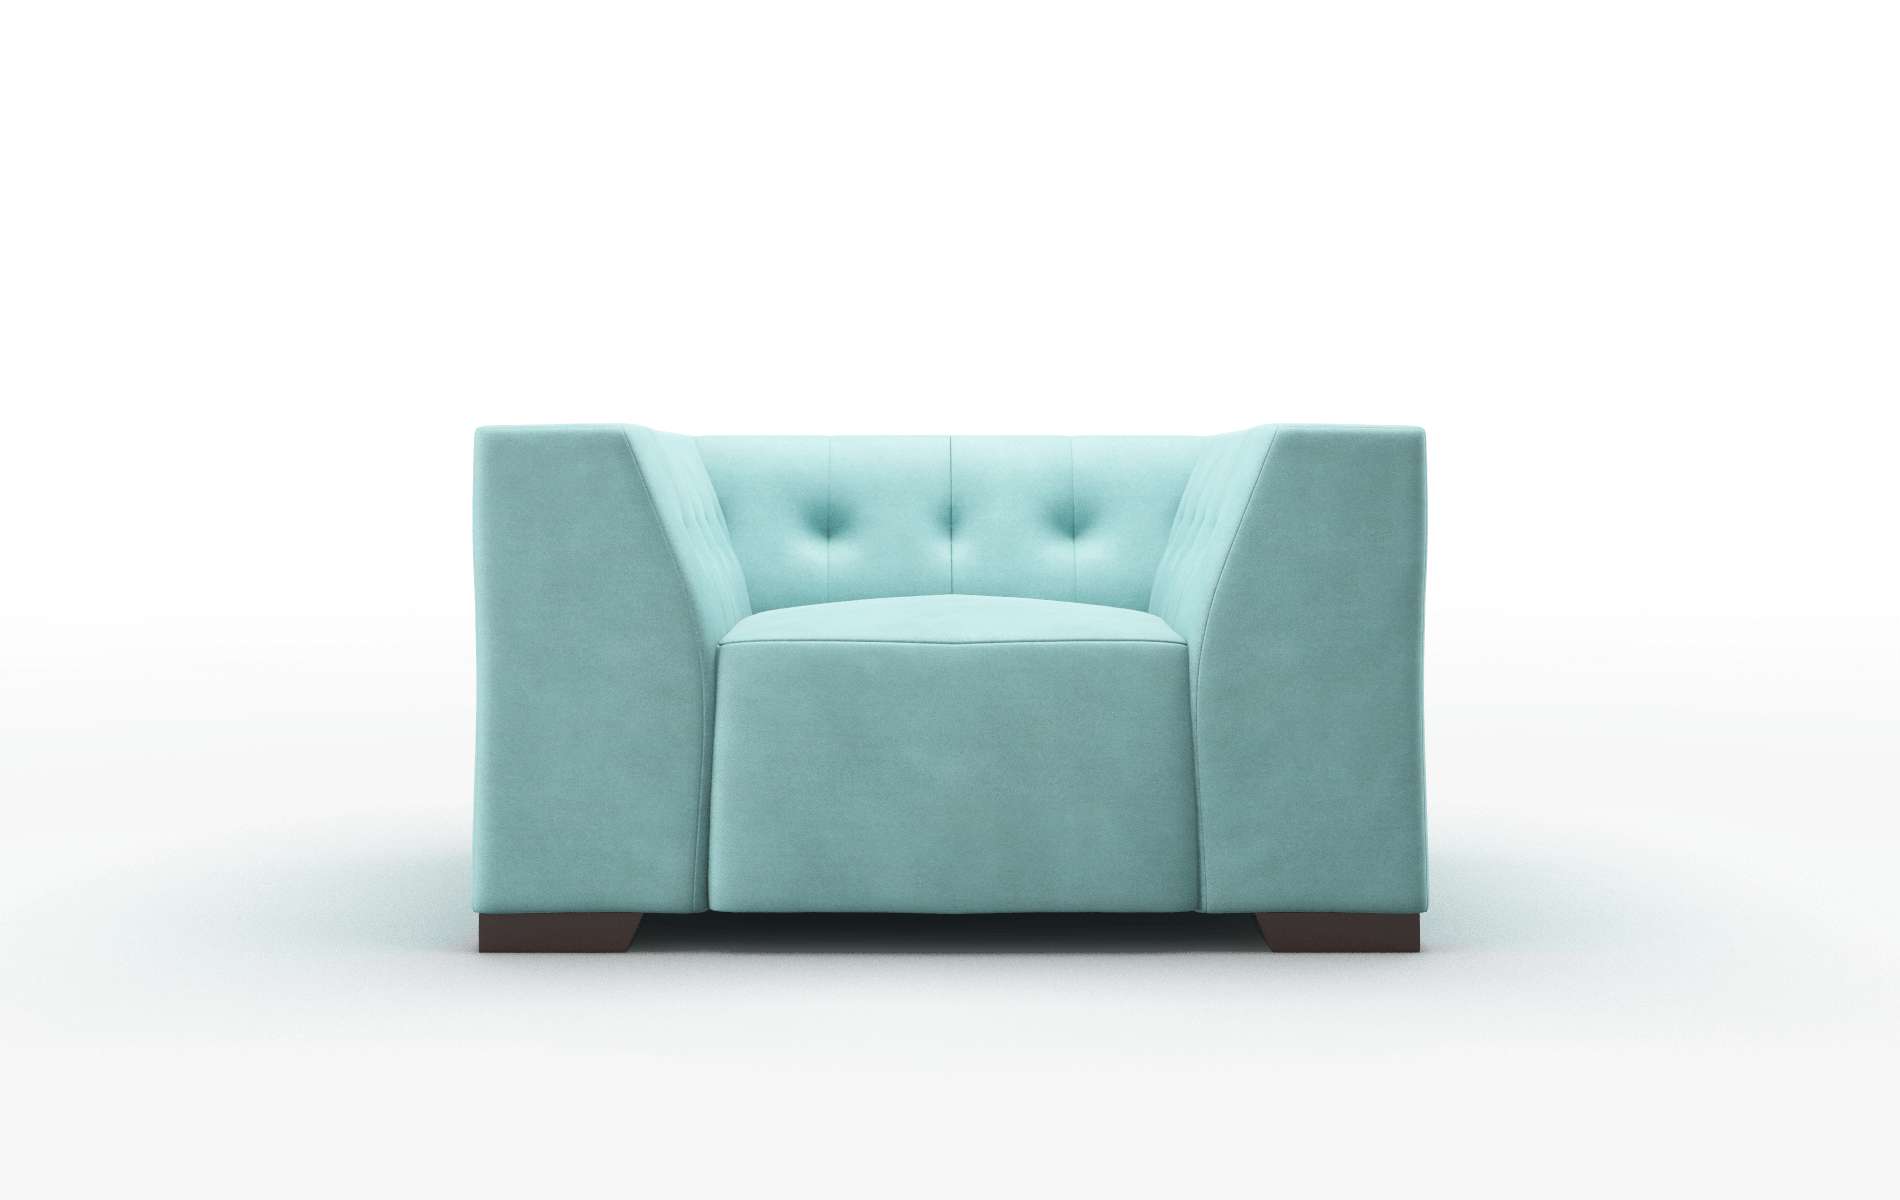 Palermo Curious Turquoise chair espresso legs